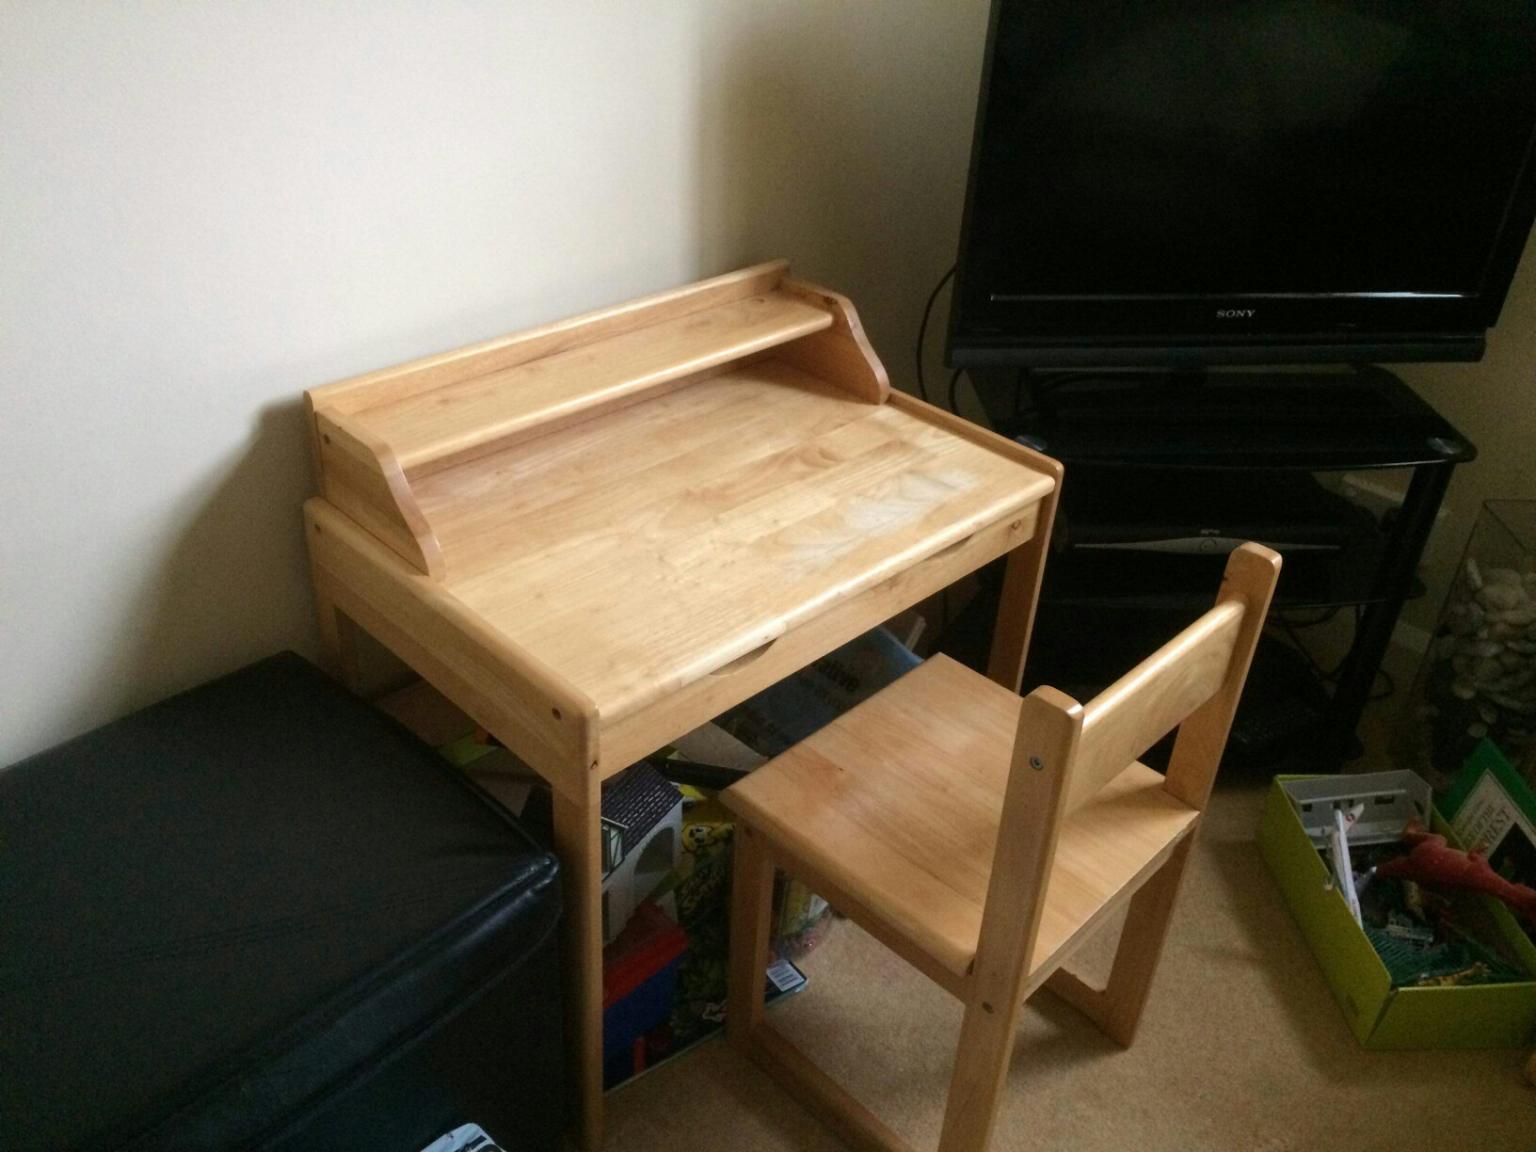 Toys R Us Kids Desk And Chair In S20 Sheffield For 12 00 For Sale